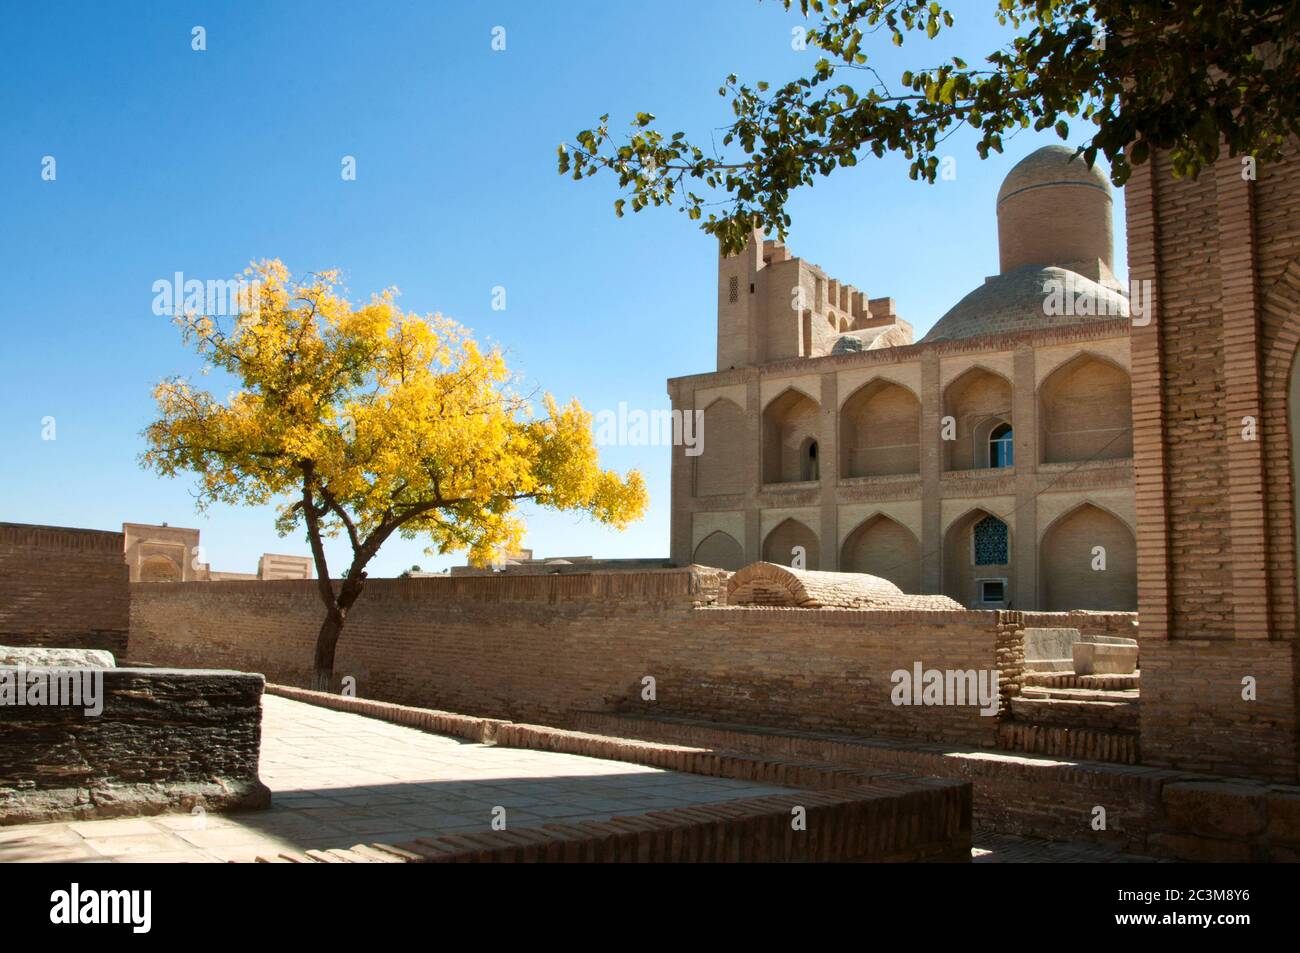 View over the memorial complex of Chor-Bakr (necropolis), also called the city of dead, with beautiful golden yellow tree, Bukhara, Uzbekistan Stock Photo